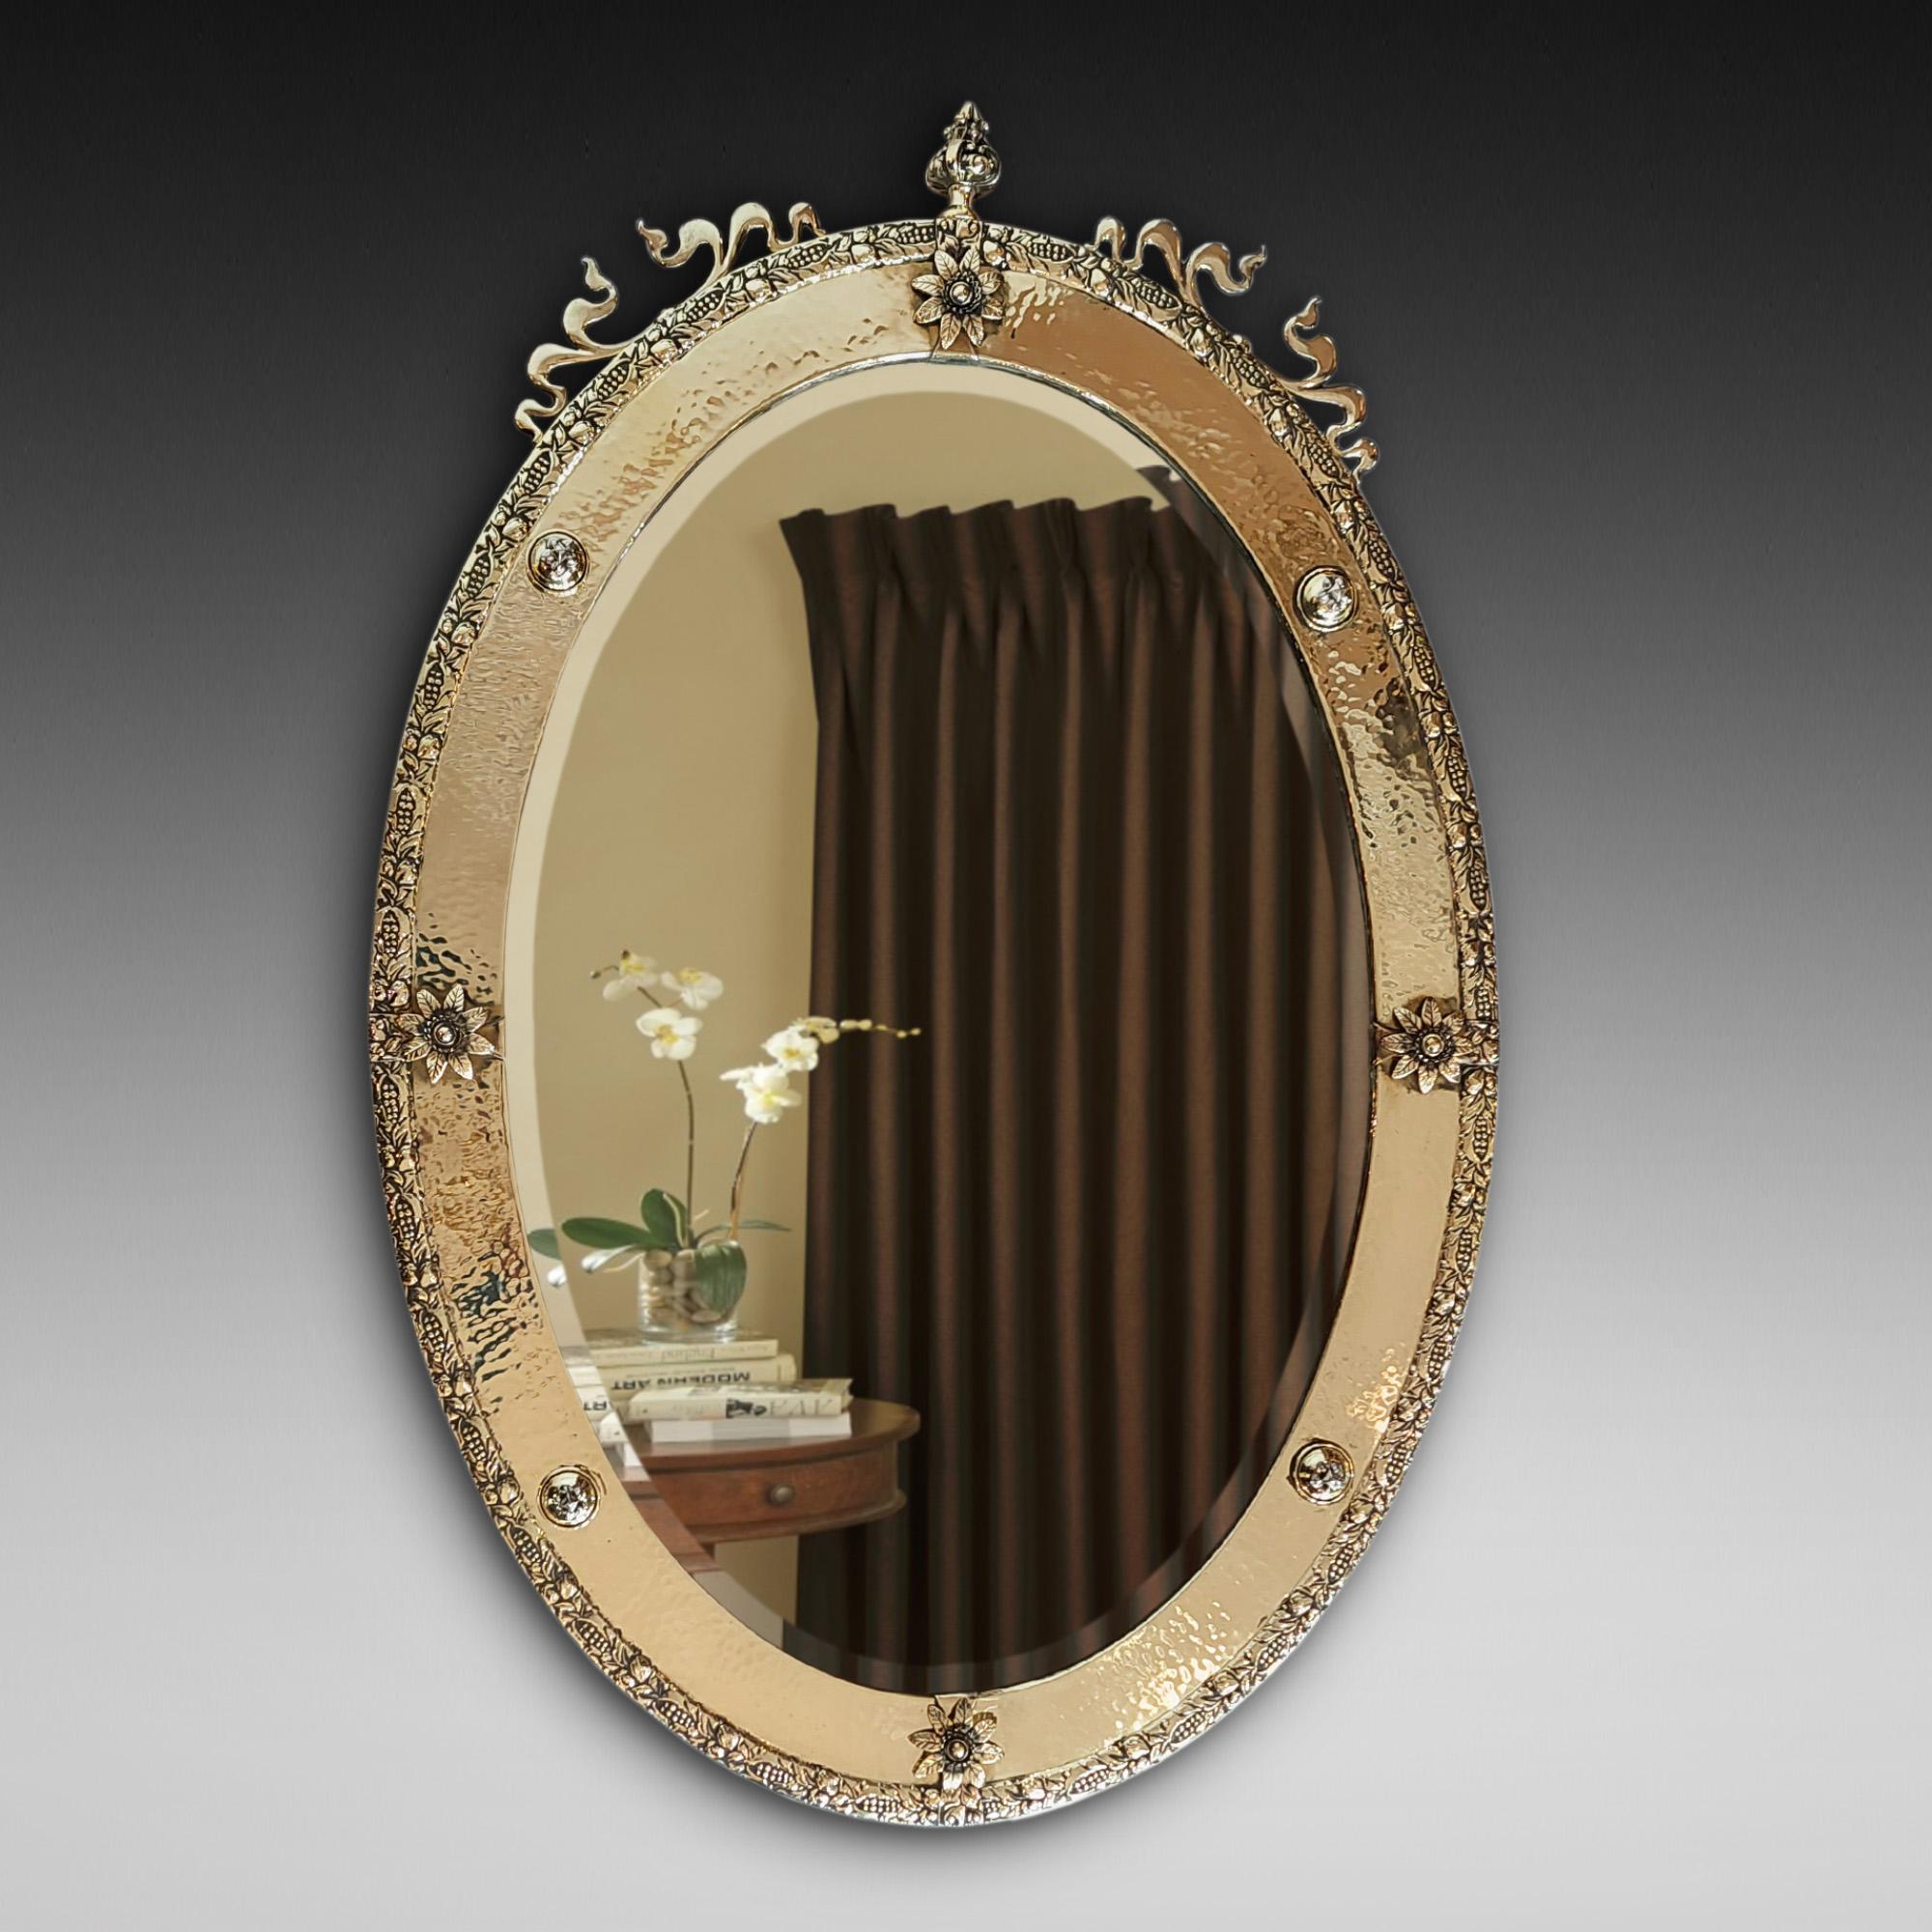 Brass Framed Arts and Crafts Mirror with beaten brass rim decorated with finial, ribbons, rosettes and bobbins 28